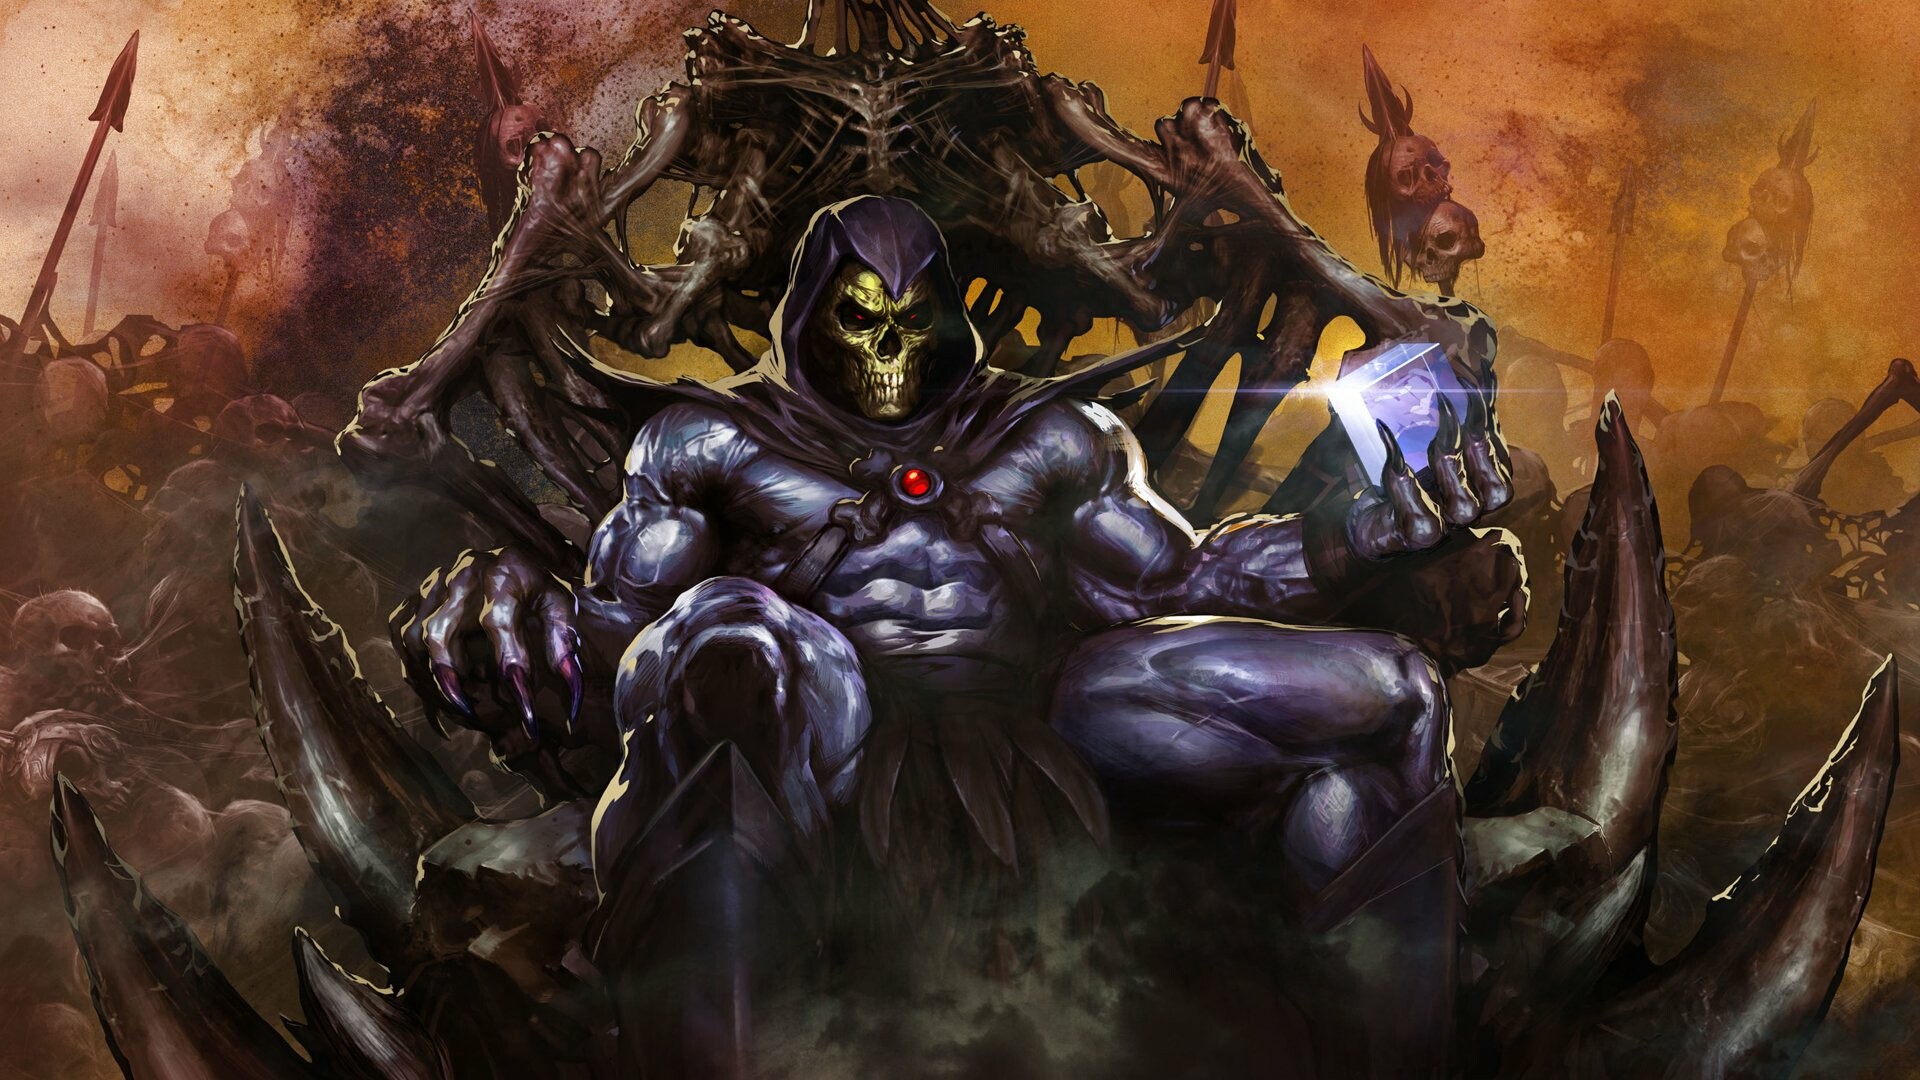 He-Man: The Masters of the Universe, Skeletor, a self-proclaimed Overlord of Evil. 1920x1080 Full HD Wallpaper.